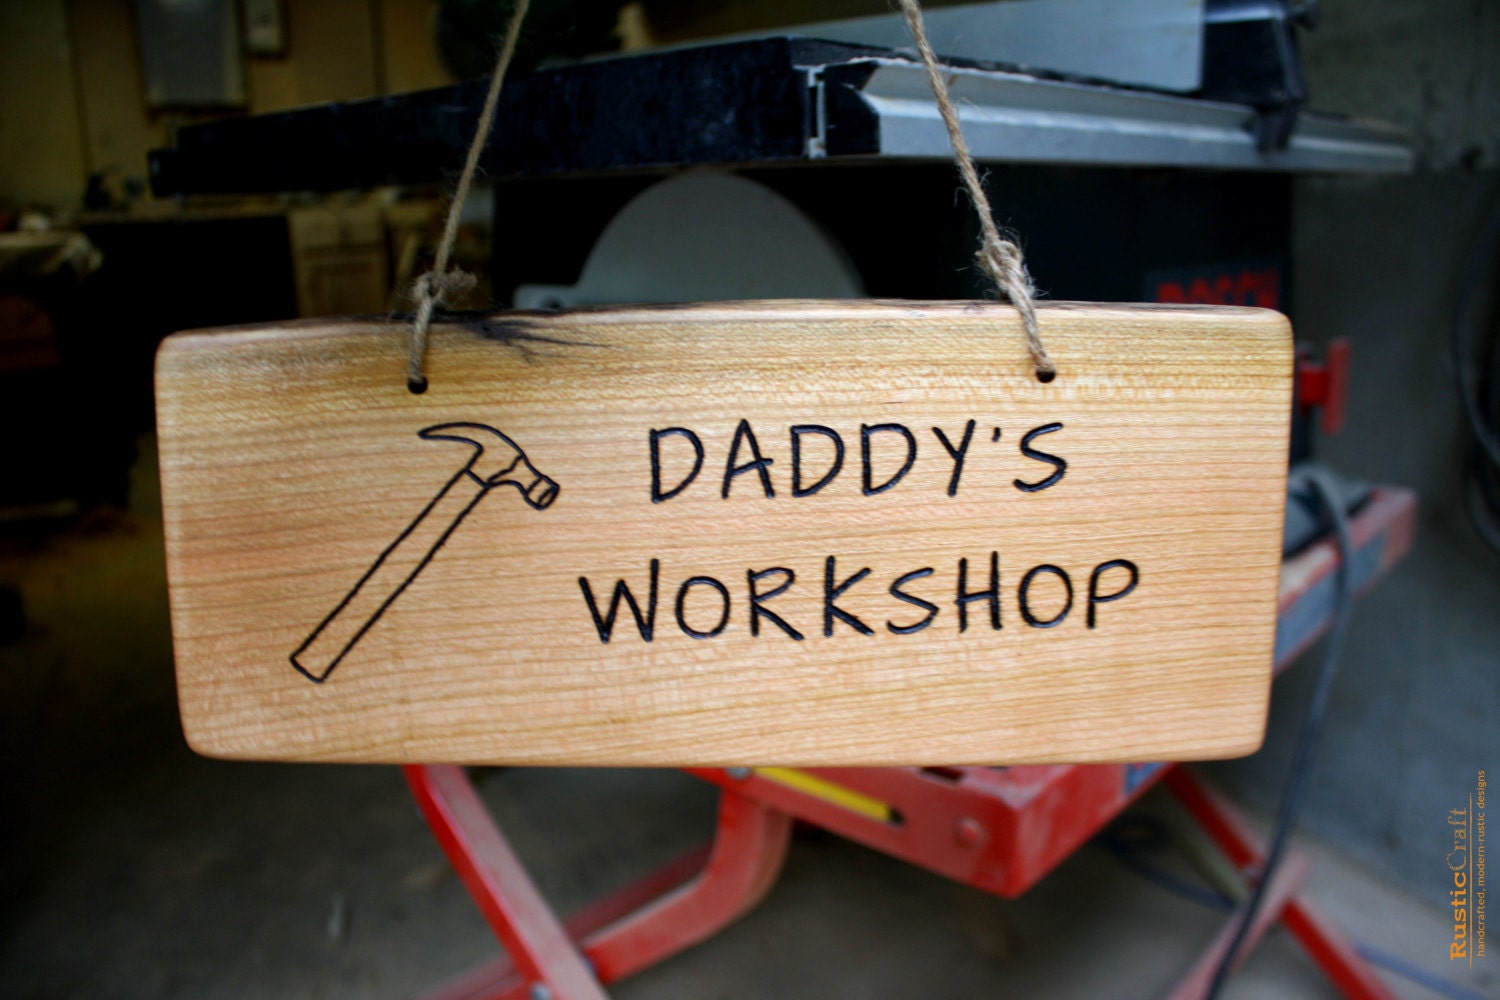 Daddy's Workshop-Hanging Rustic Wood Sign - Large-Long - Personalized Gift - Hand Engraved - Unique dad gift - rusticcraftdesign